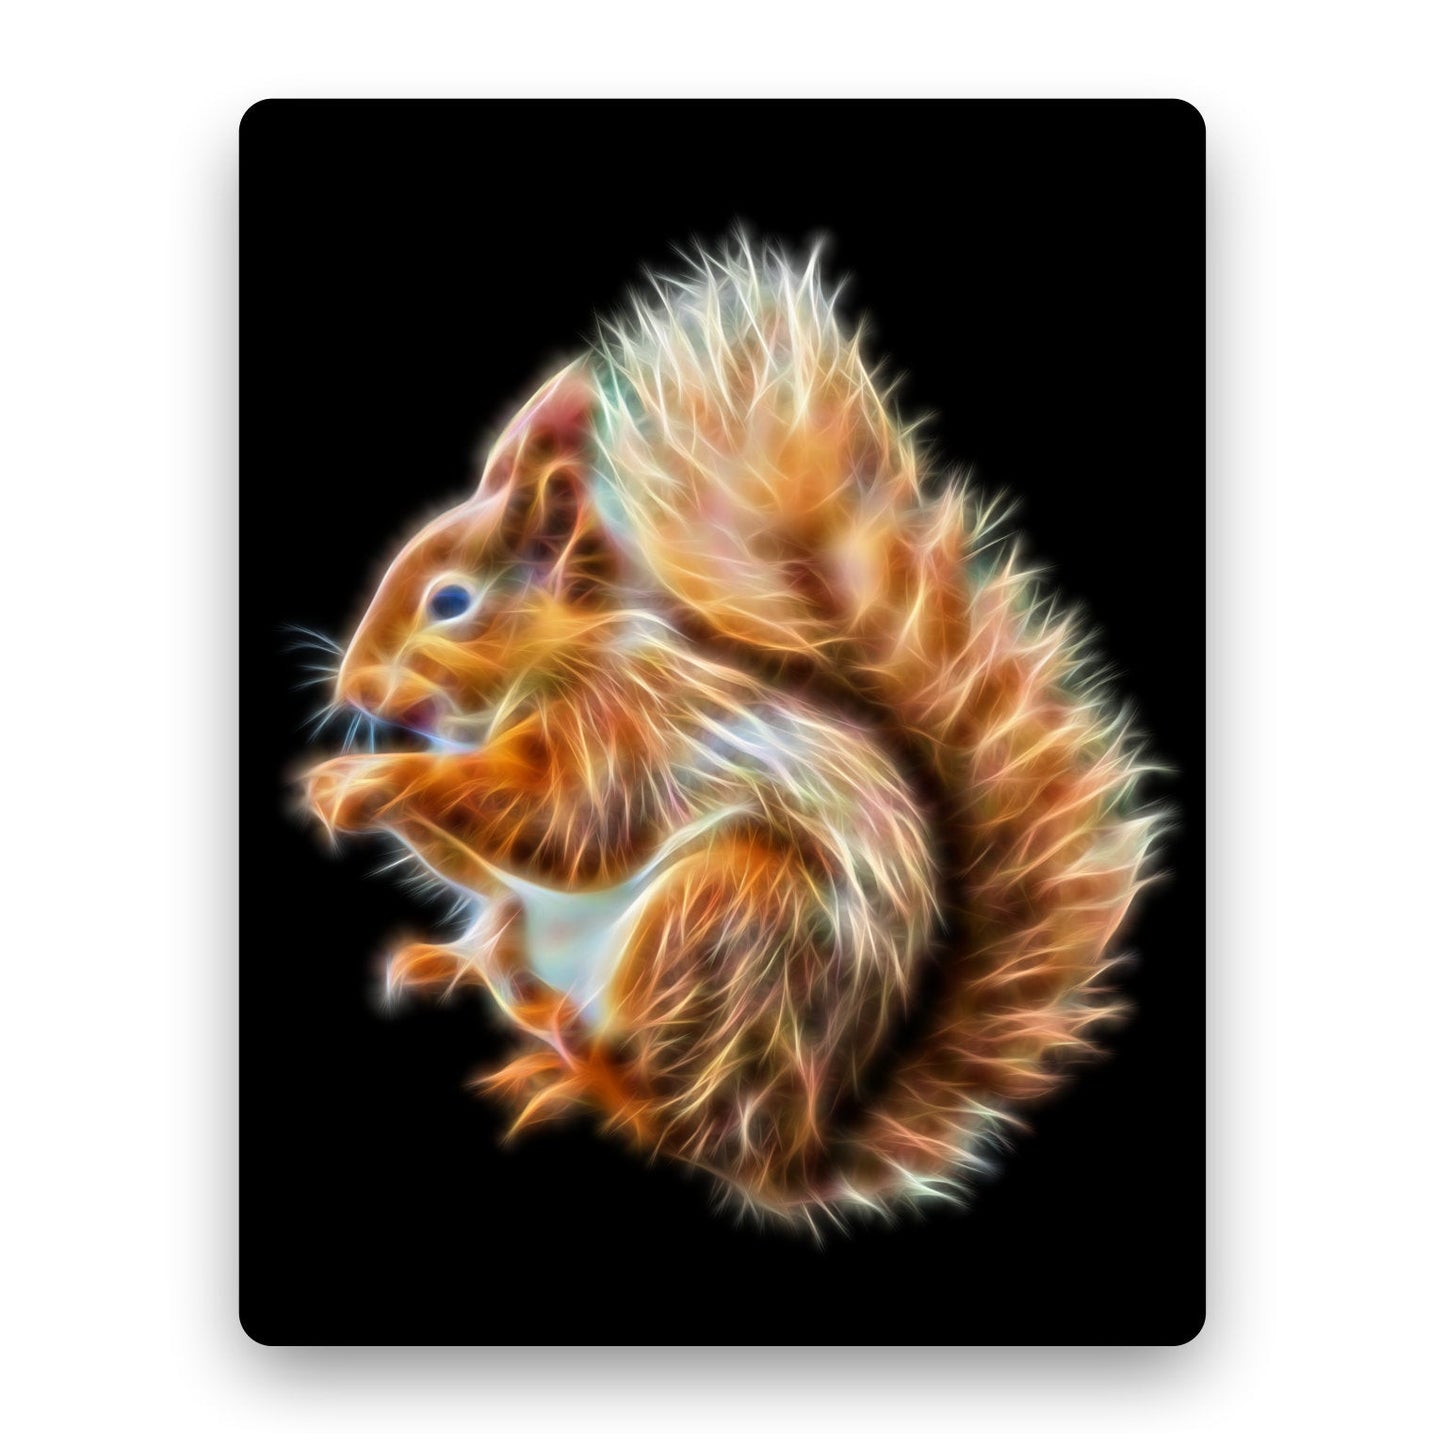 Red Squirrel Metal Wall Plaque with Stunning Fractal Art Design